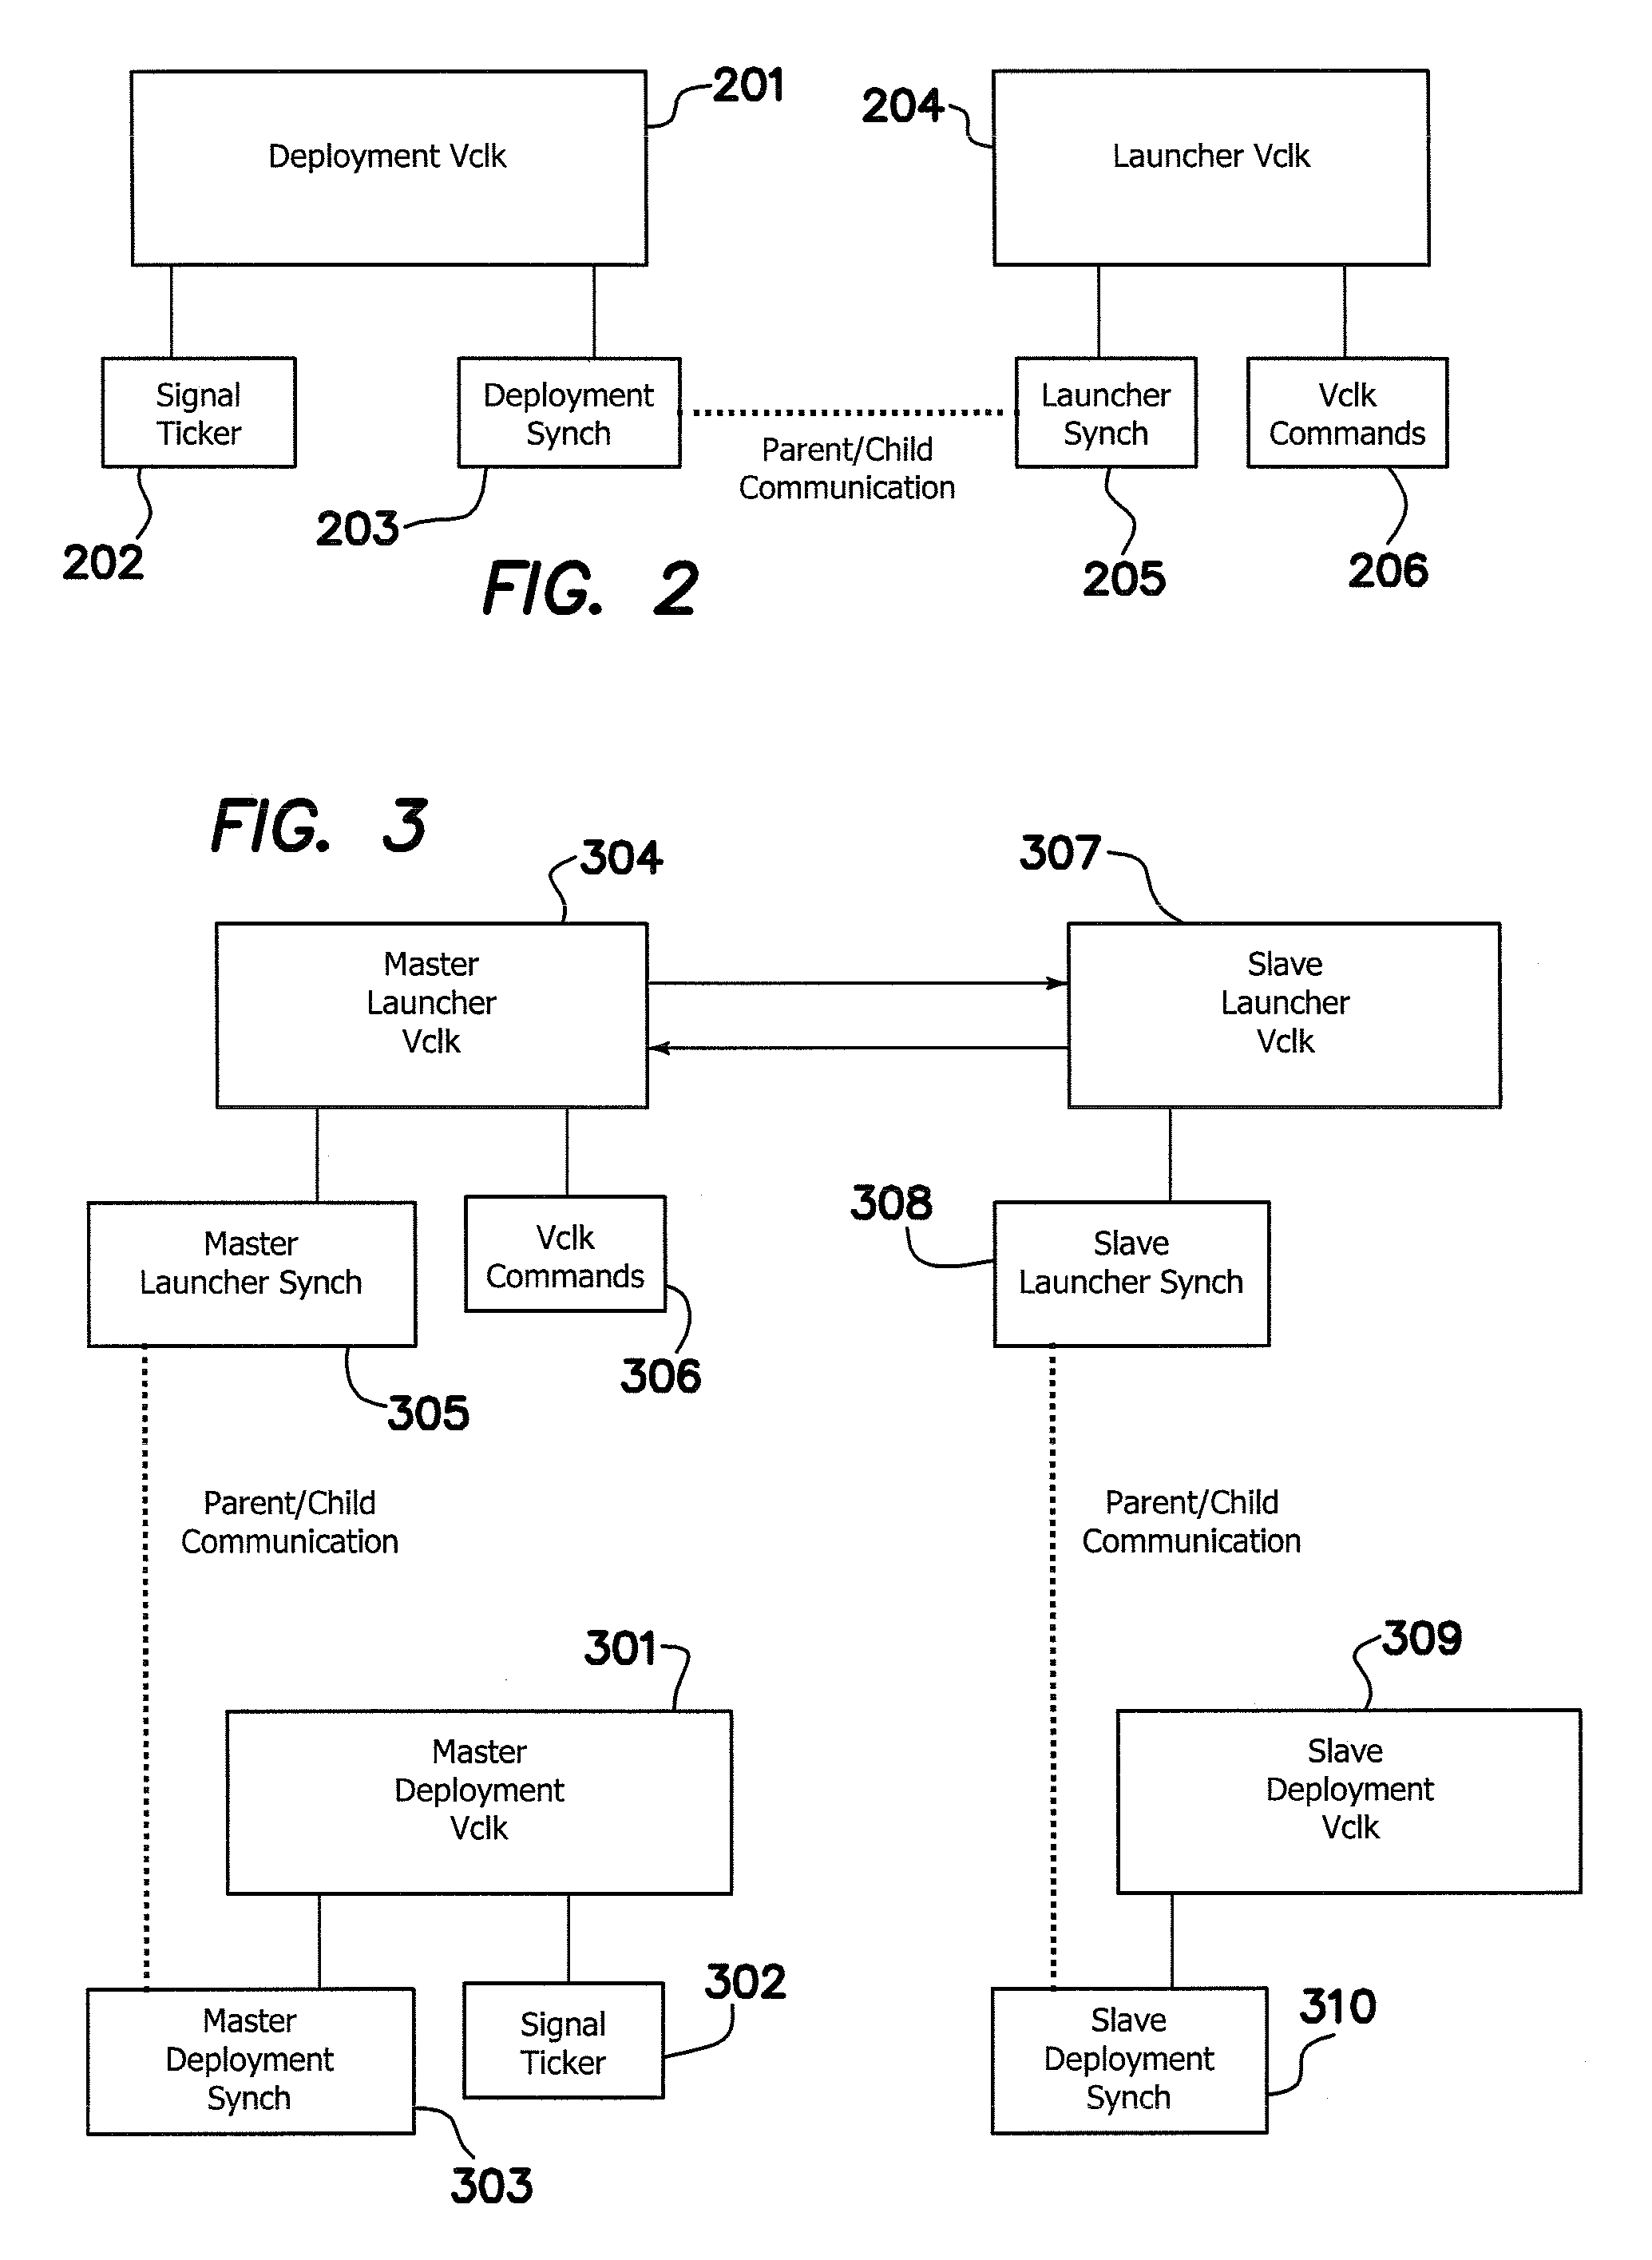 Method and apparatus for computer simulation of flight test beds